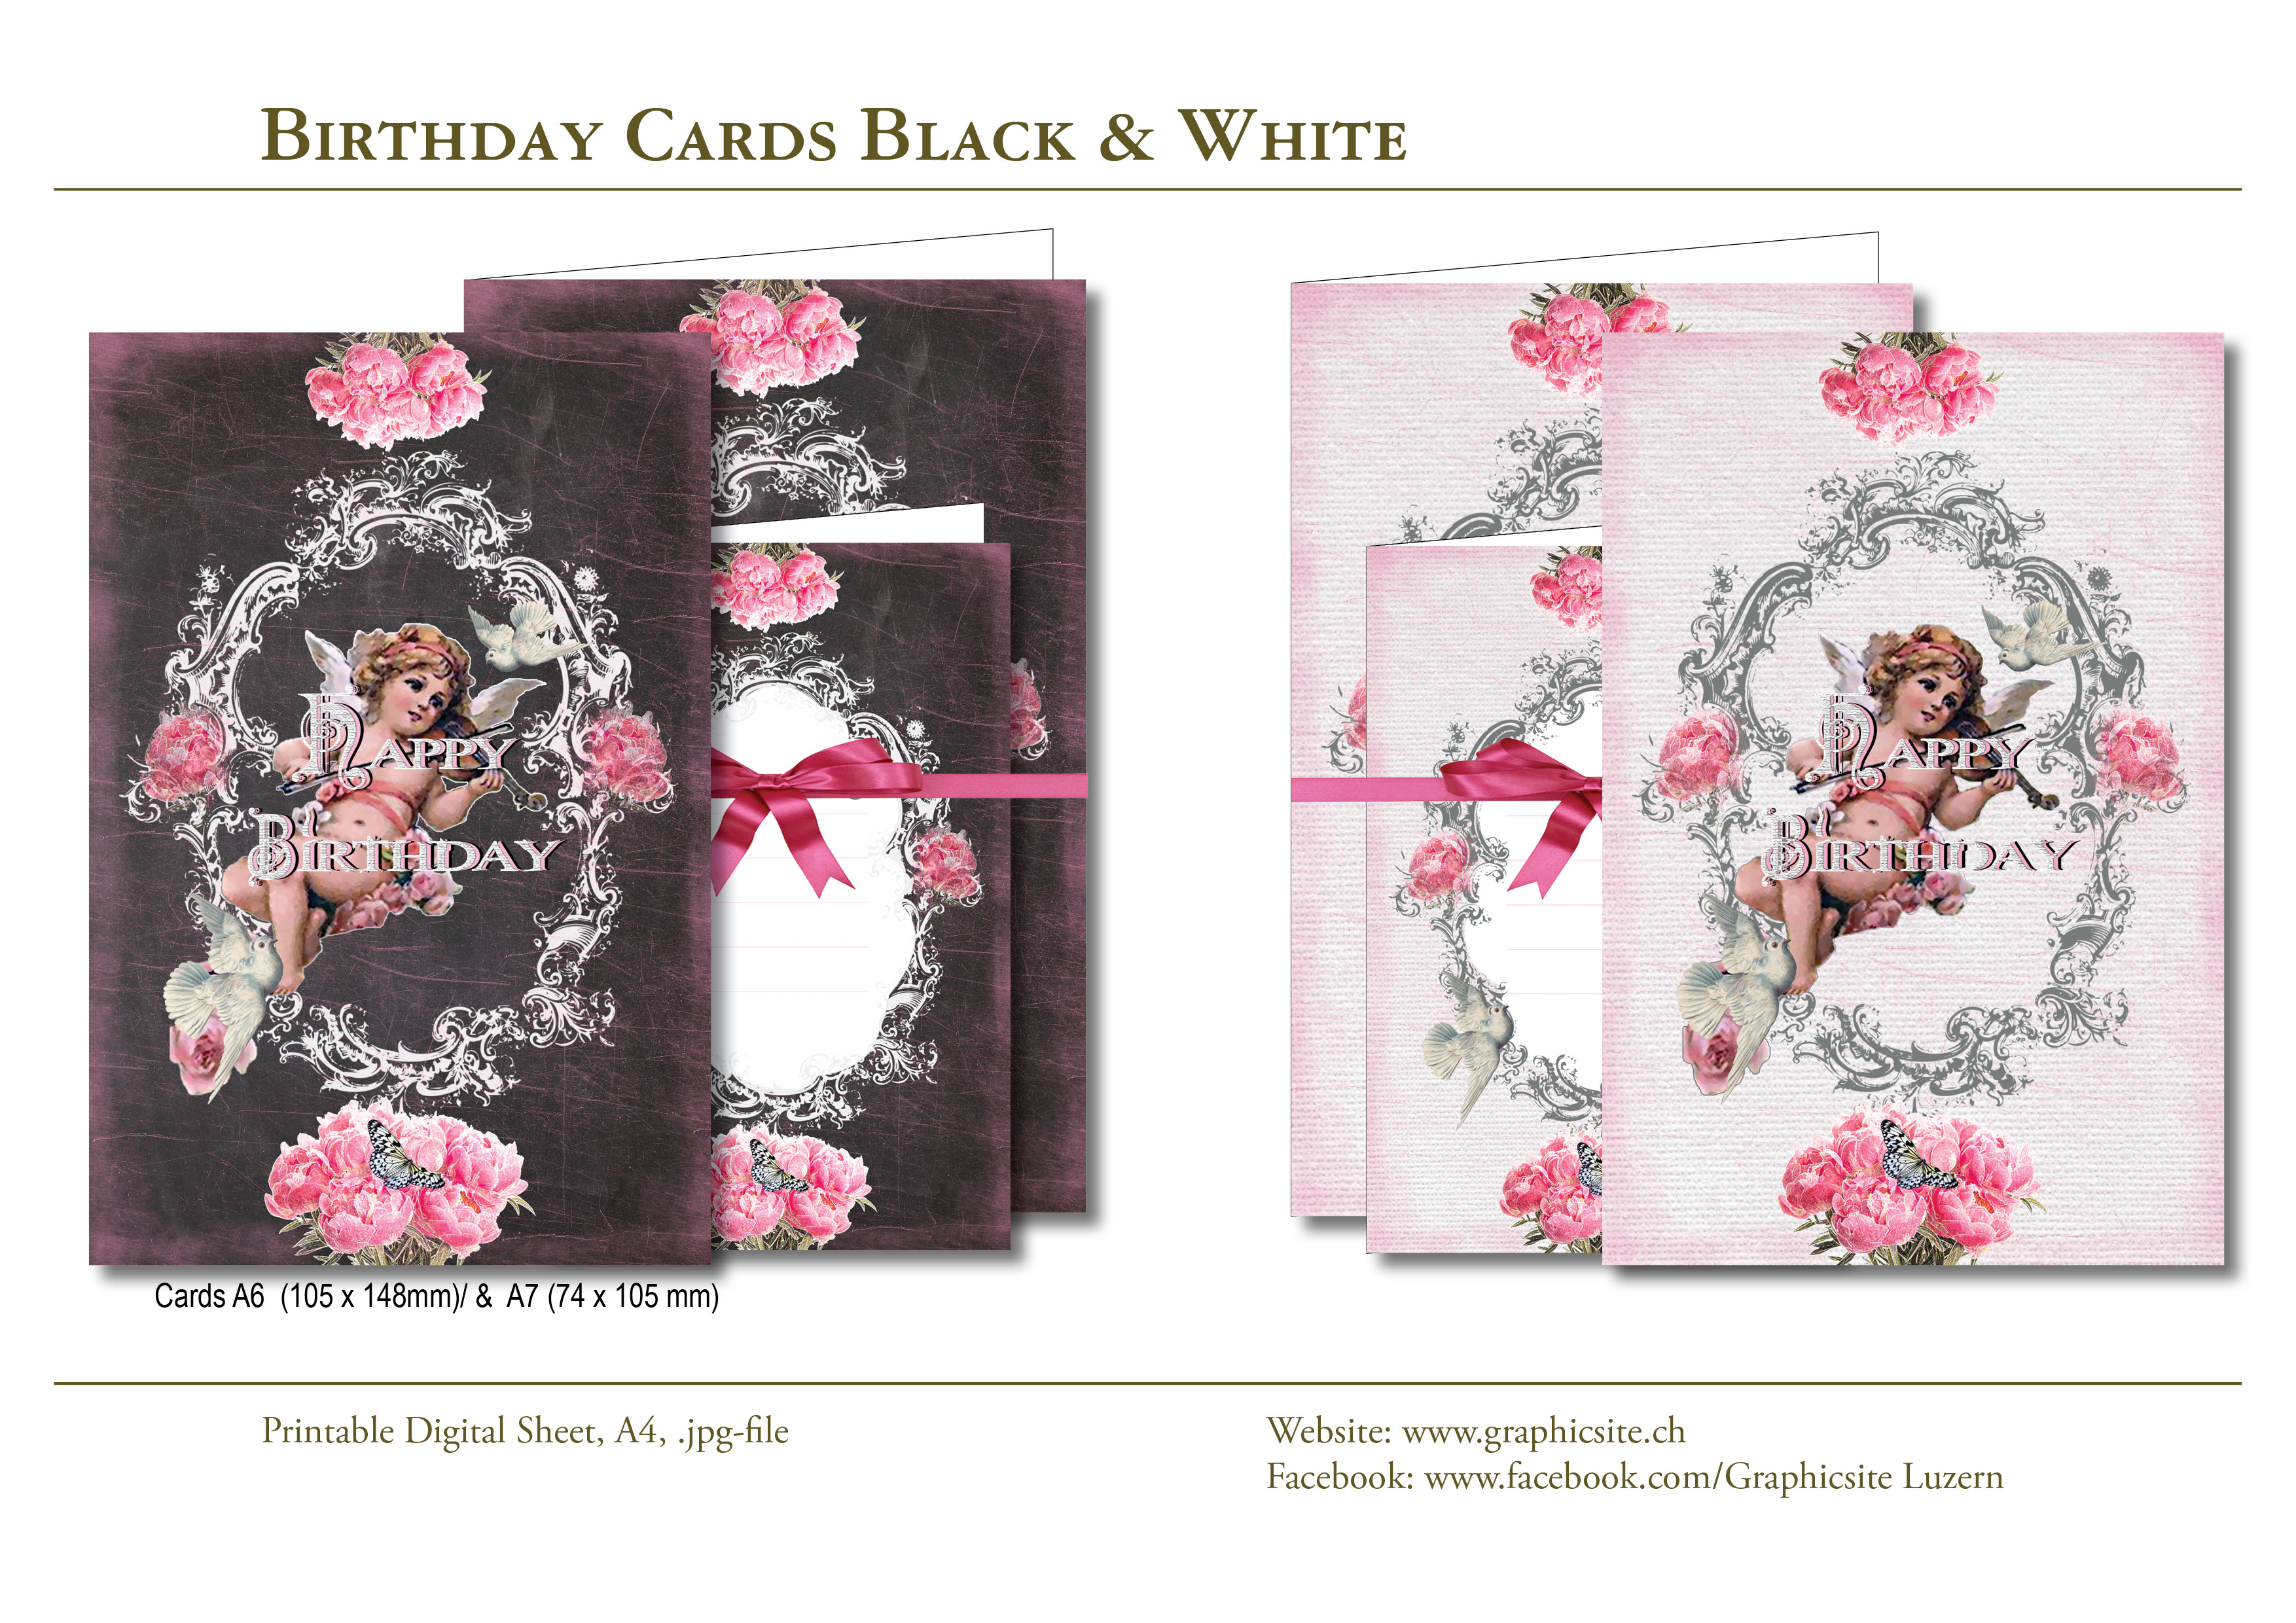 Printable Sheets - Cards A6/A7 - Birthday - BlackWhite, Angel, Roses 